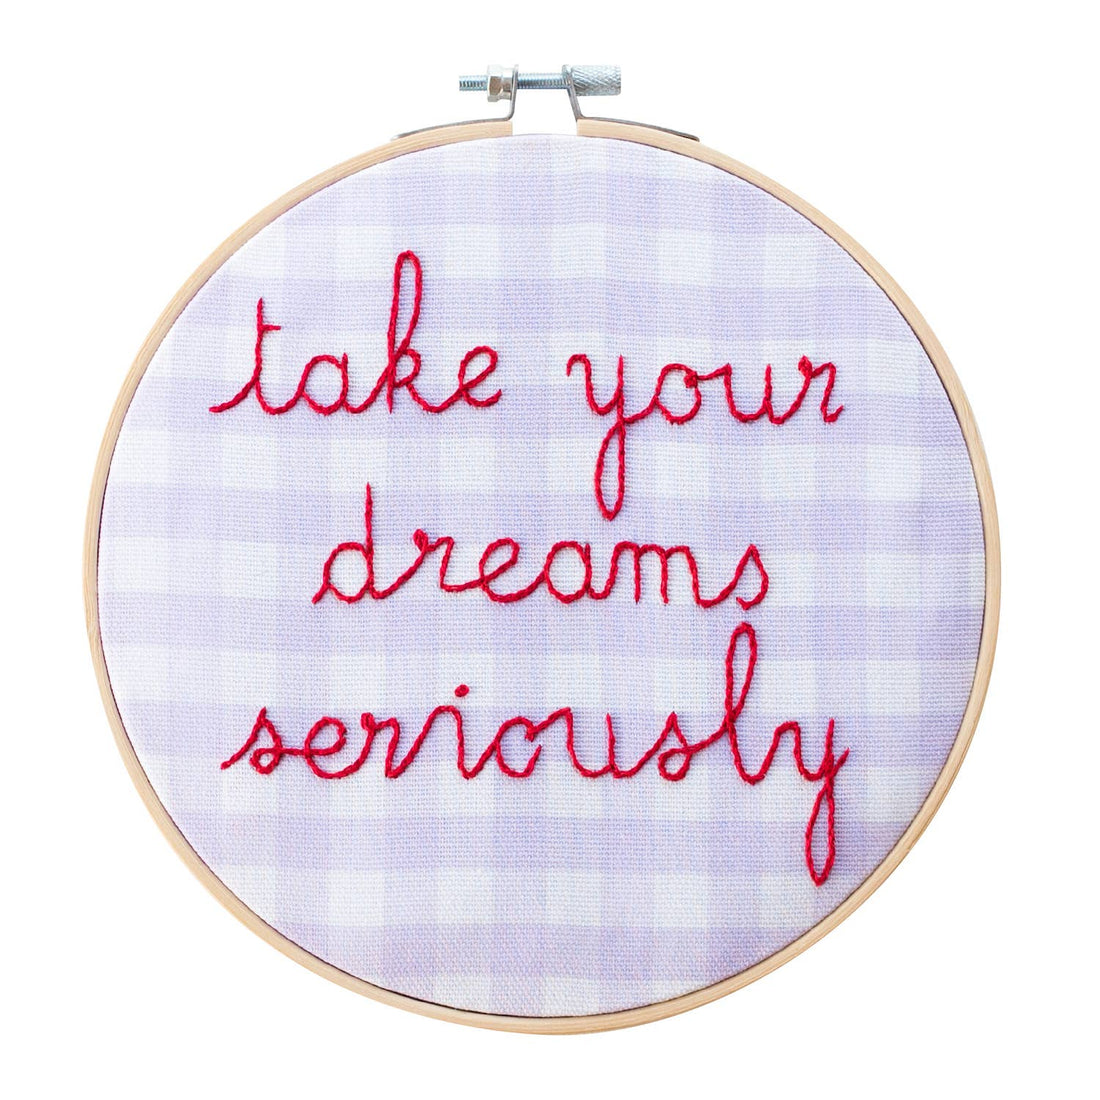 Take Your Dreams Seriously Embroidery Kit